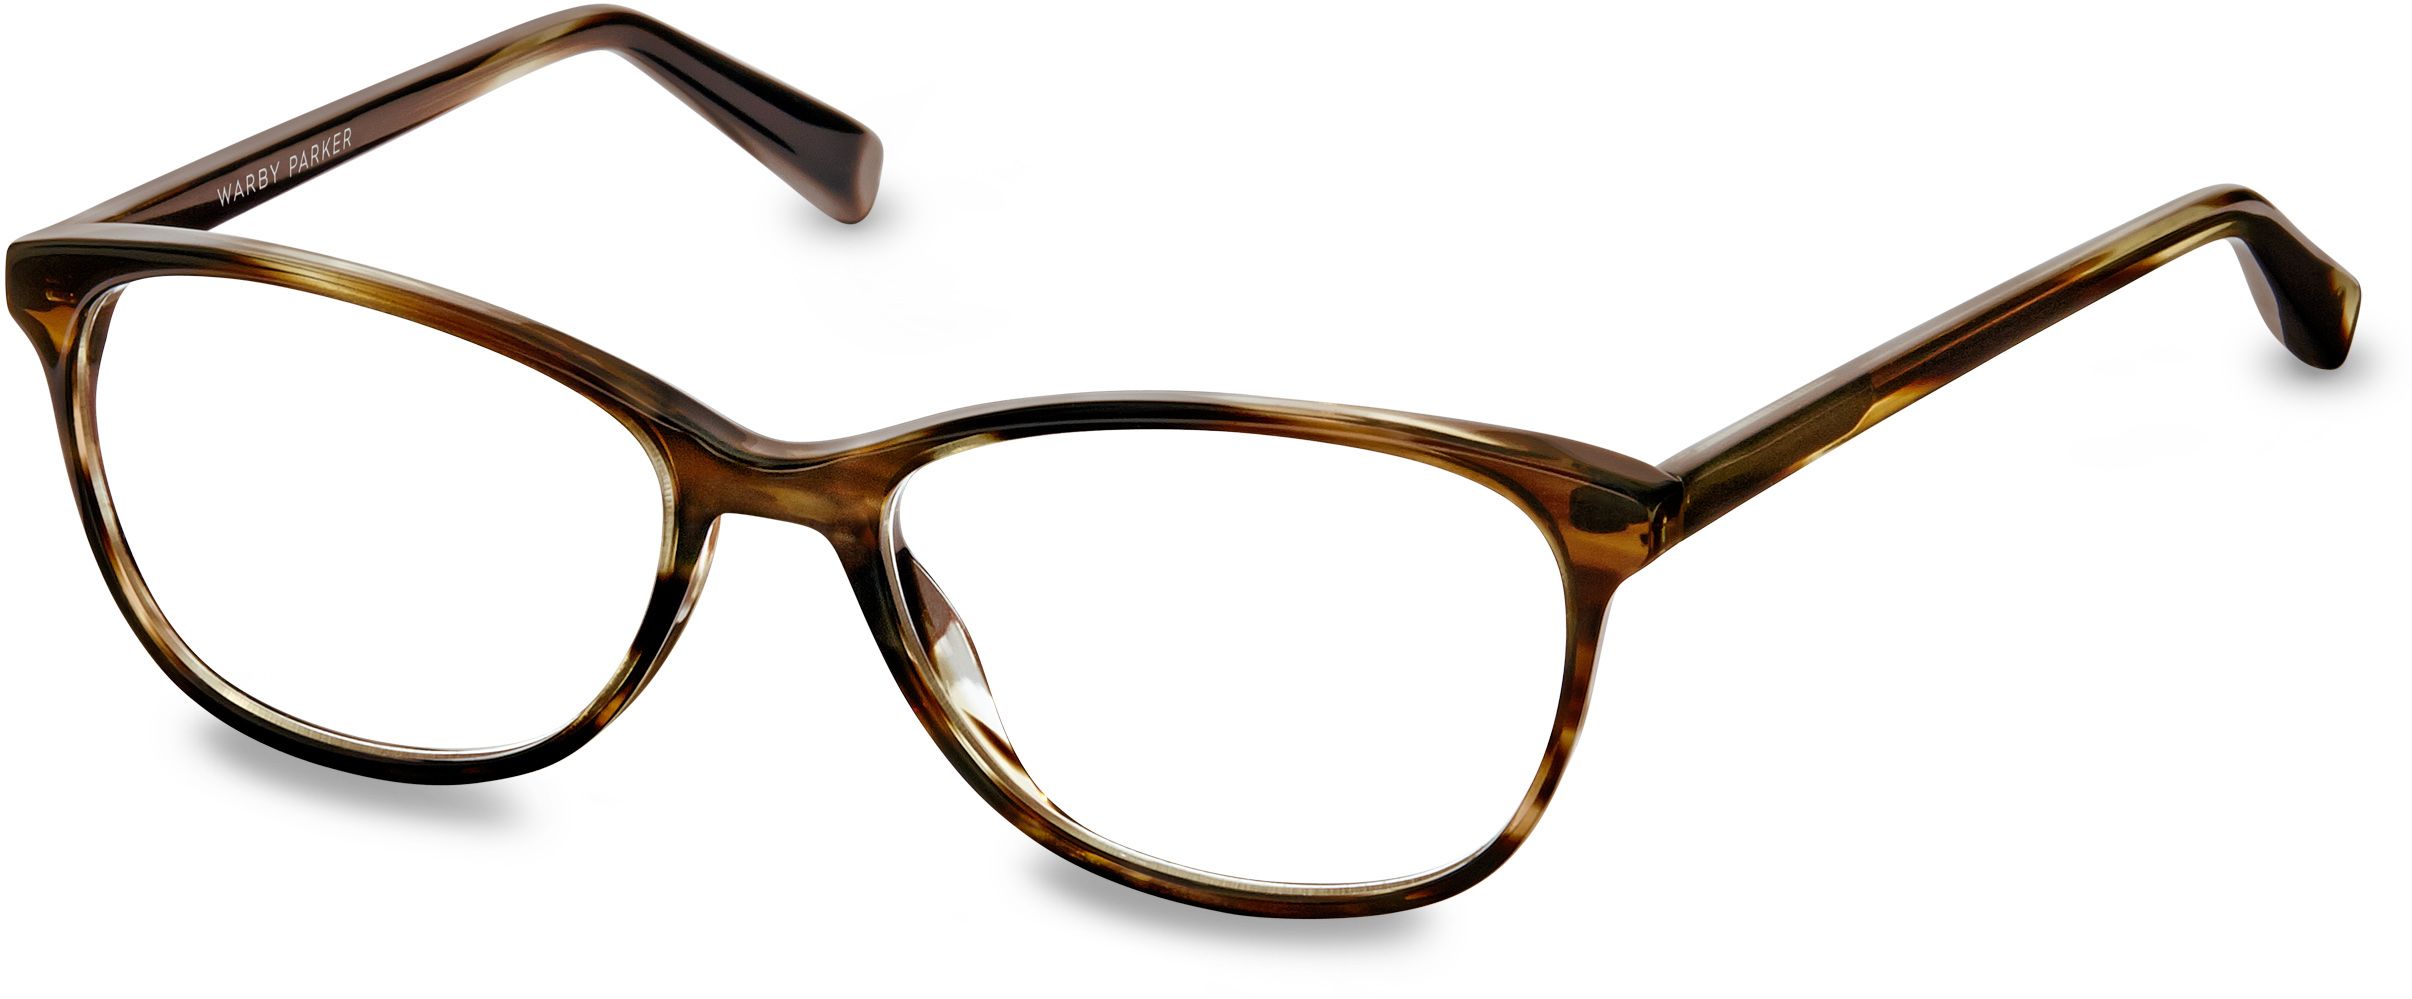 Daisy Eyeglasses in Striped Molasses for Women | Warby Parker